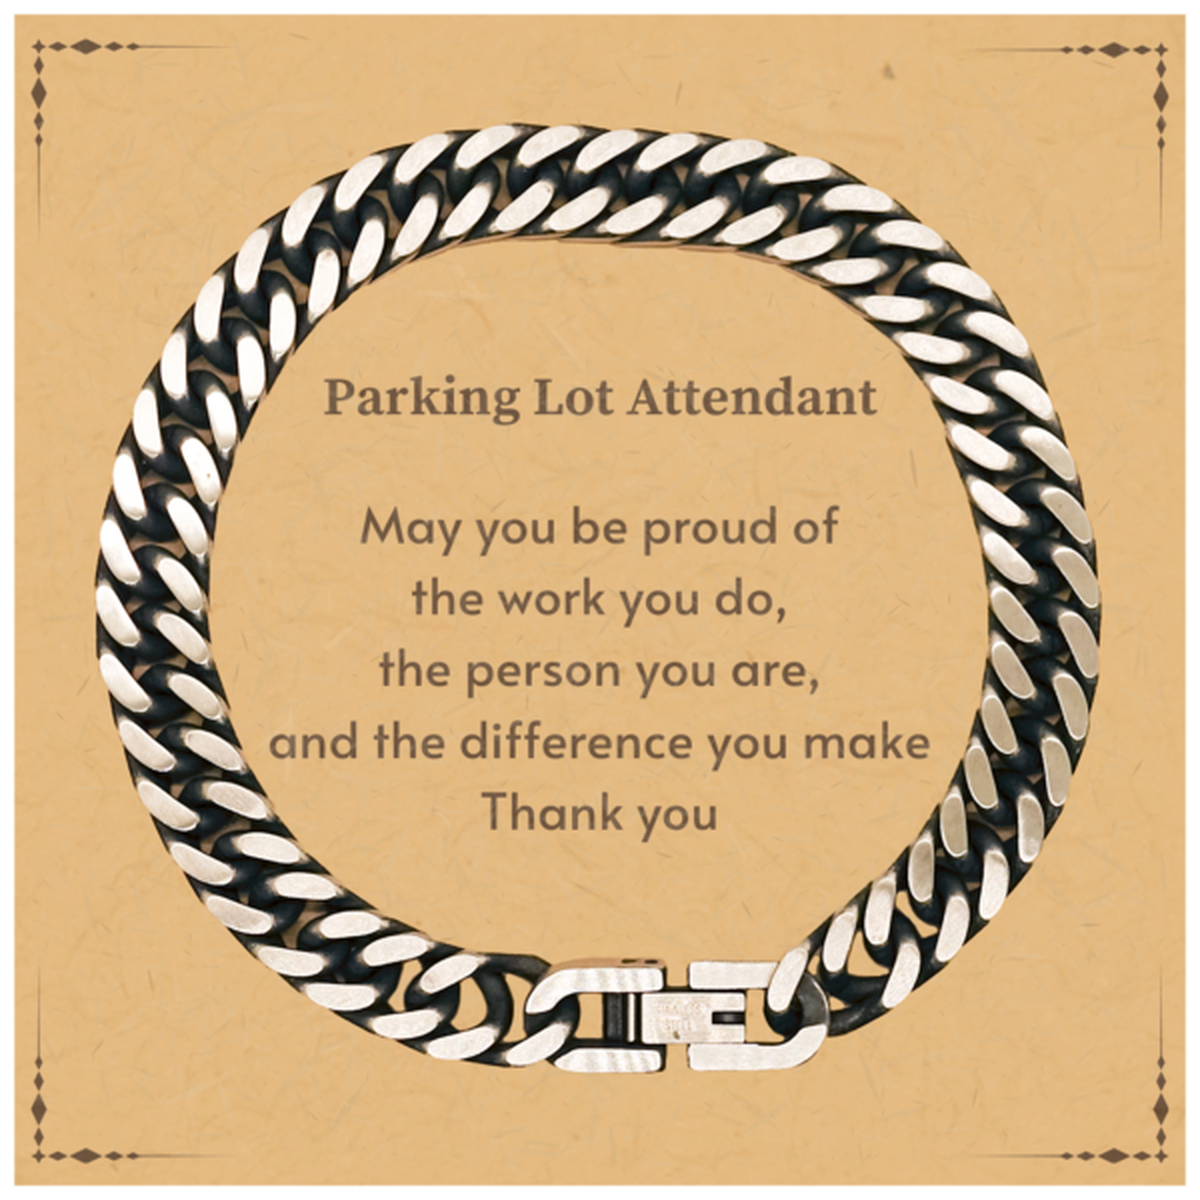 Heartwarming Cuban Link Chain Bracelet Retirement Coworkers Gifts for Parking Lot Attendant, Parking Lot Attendant May You be proud of the work you do, the person you are Gifts for Boss Men Women Friends